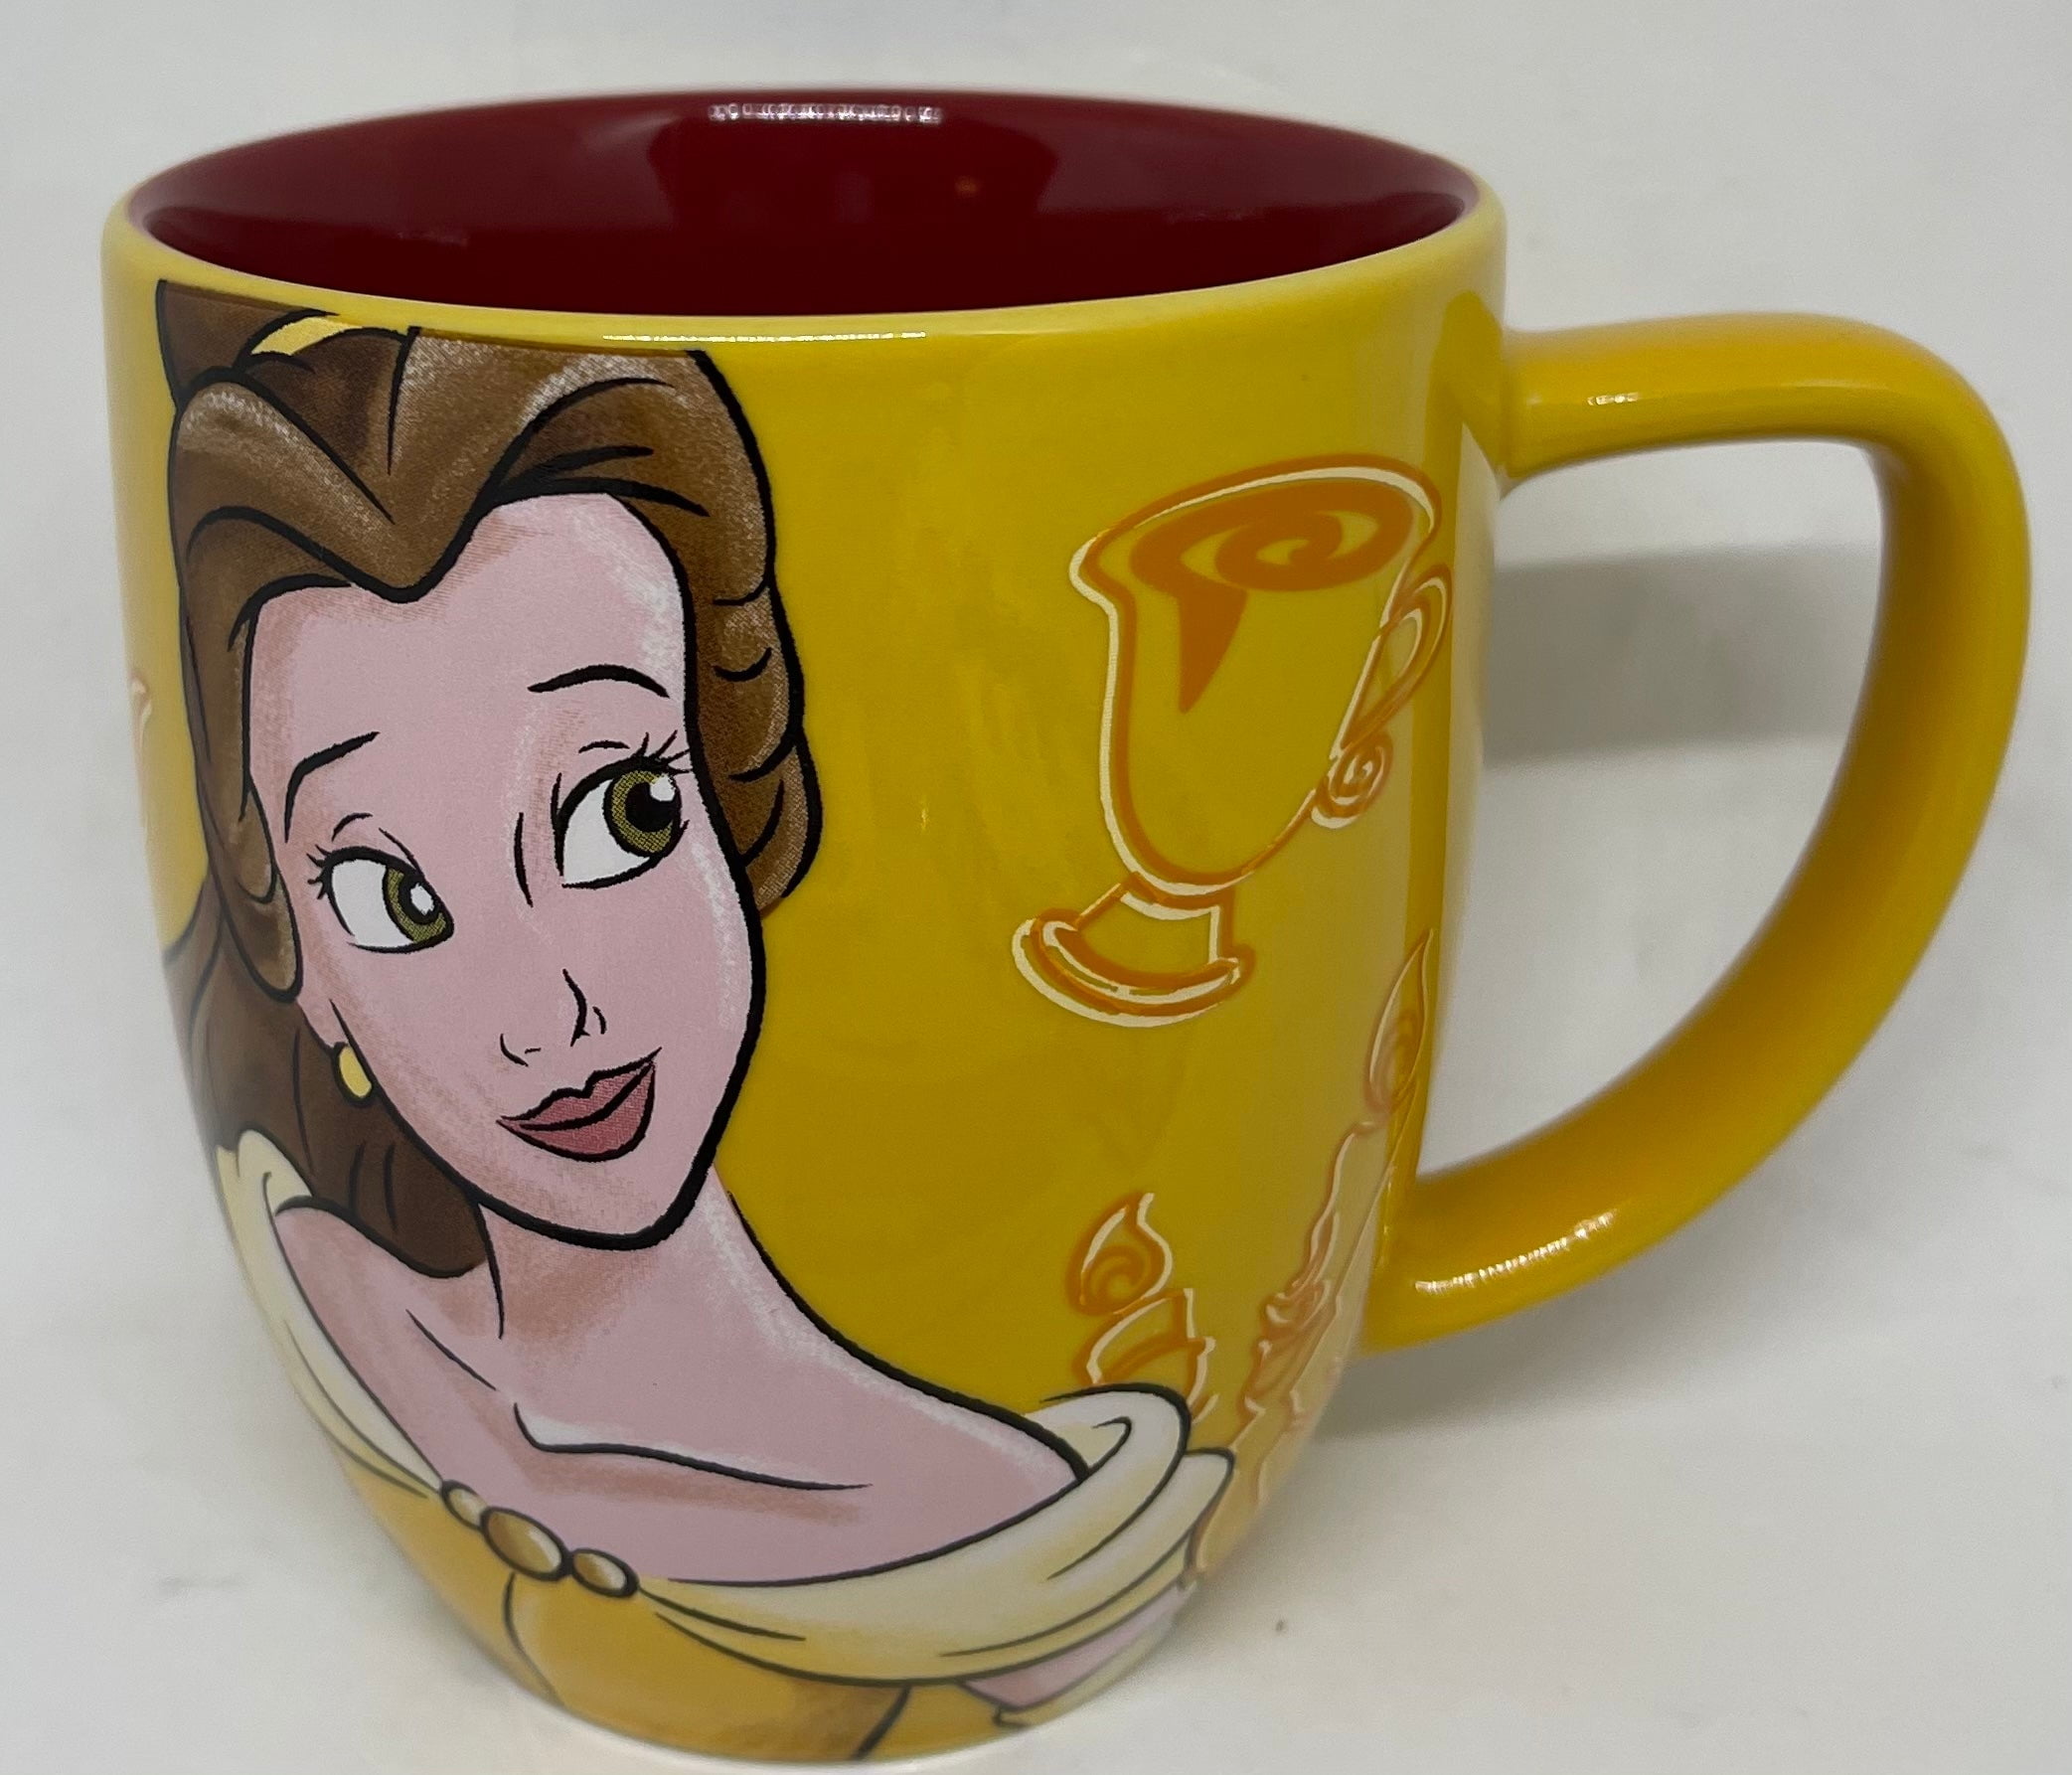 Belle - Beauty and the Beast Coffee Mug by Creative Chapps